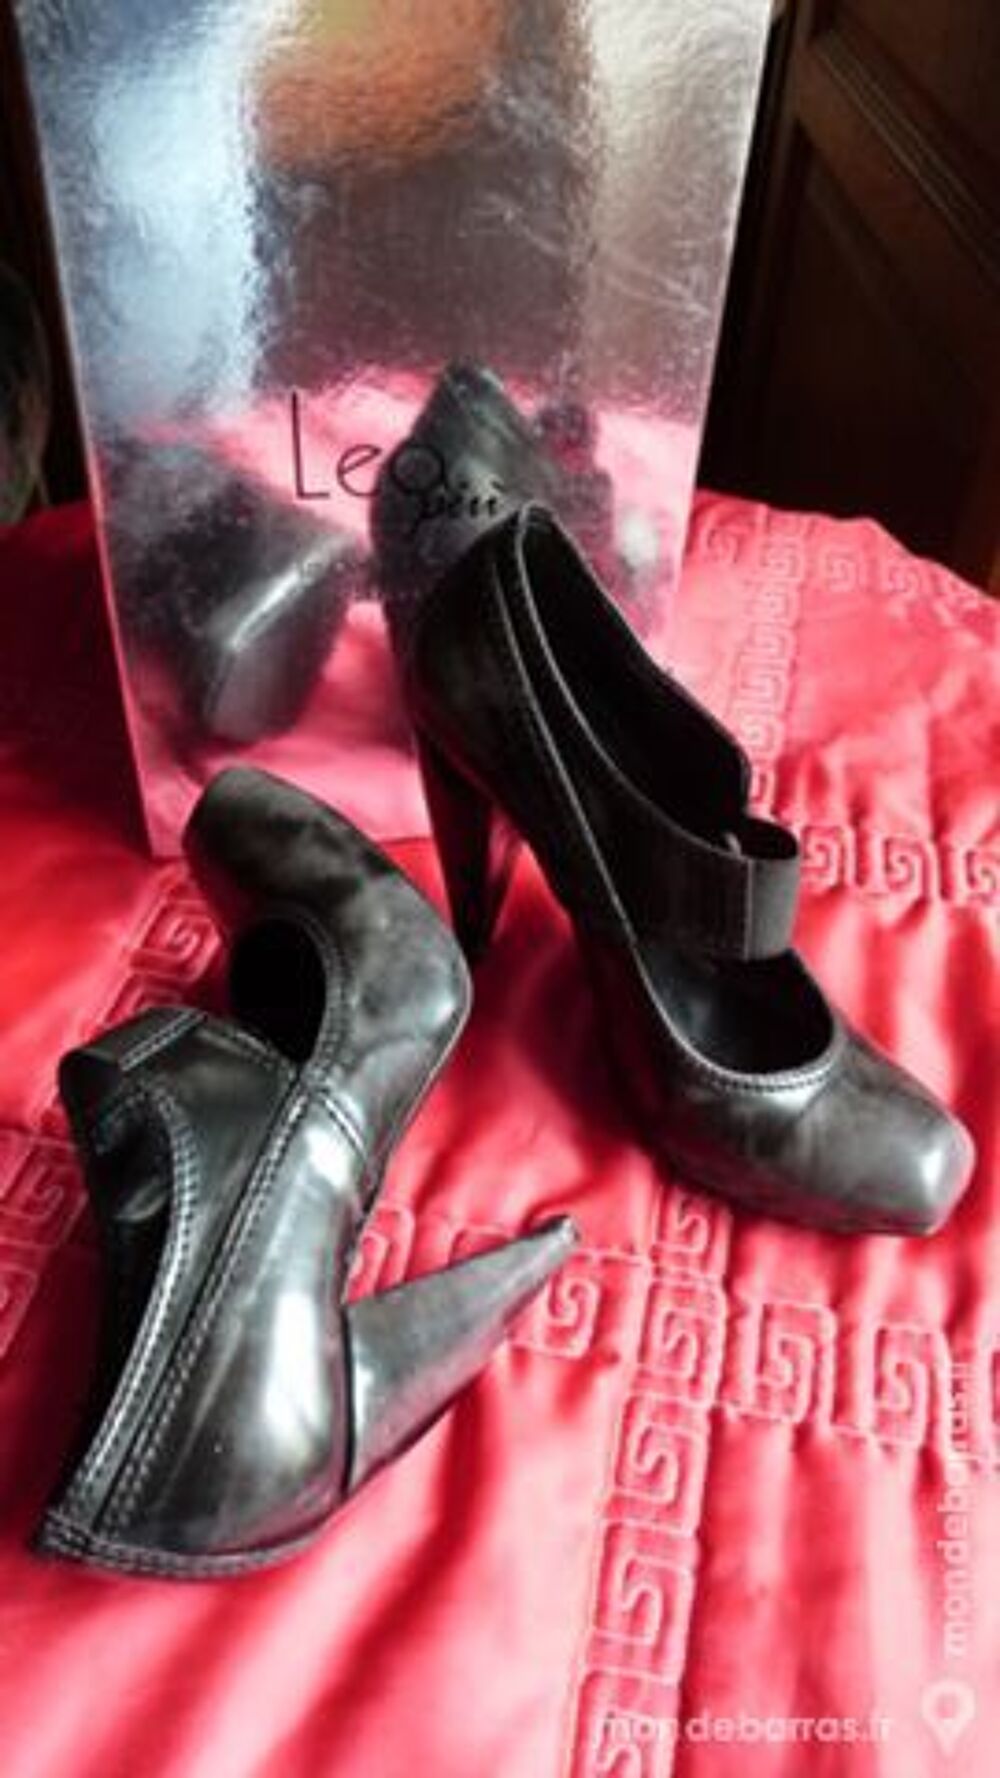 Chaussures femme italiennes &quot;lea piu&quot; taille 37 Chaussures